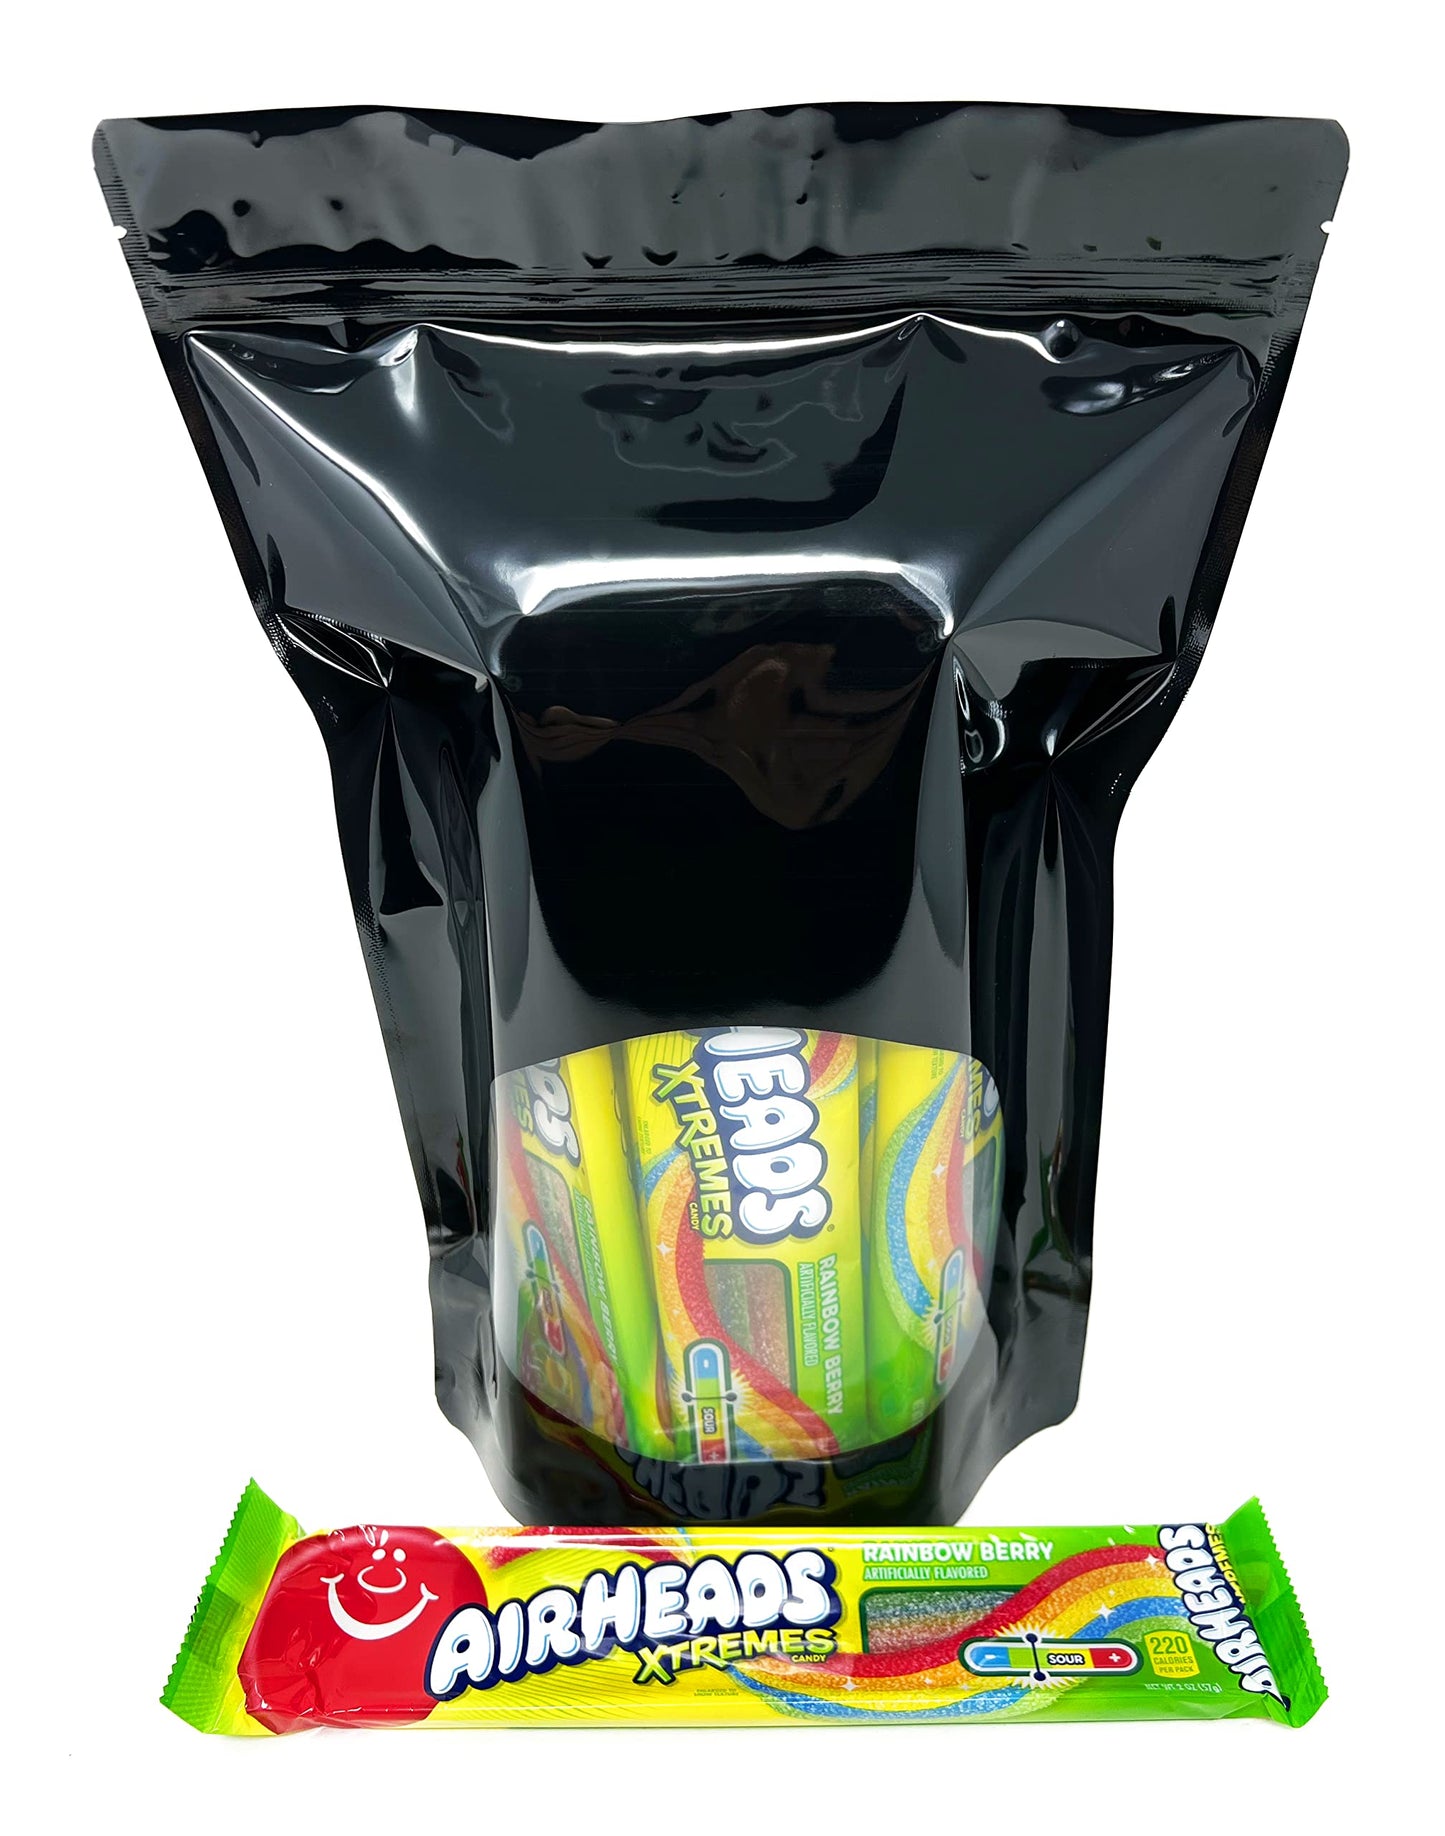 Airheads Xtremes Sour Candy Assortment - 6 Count